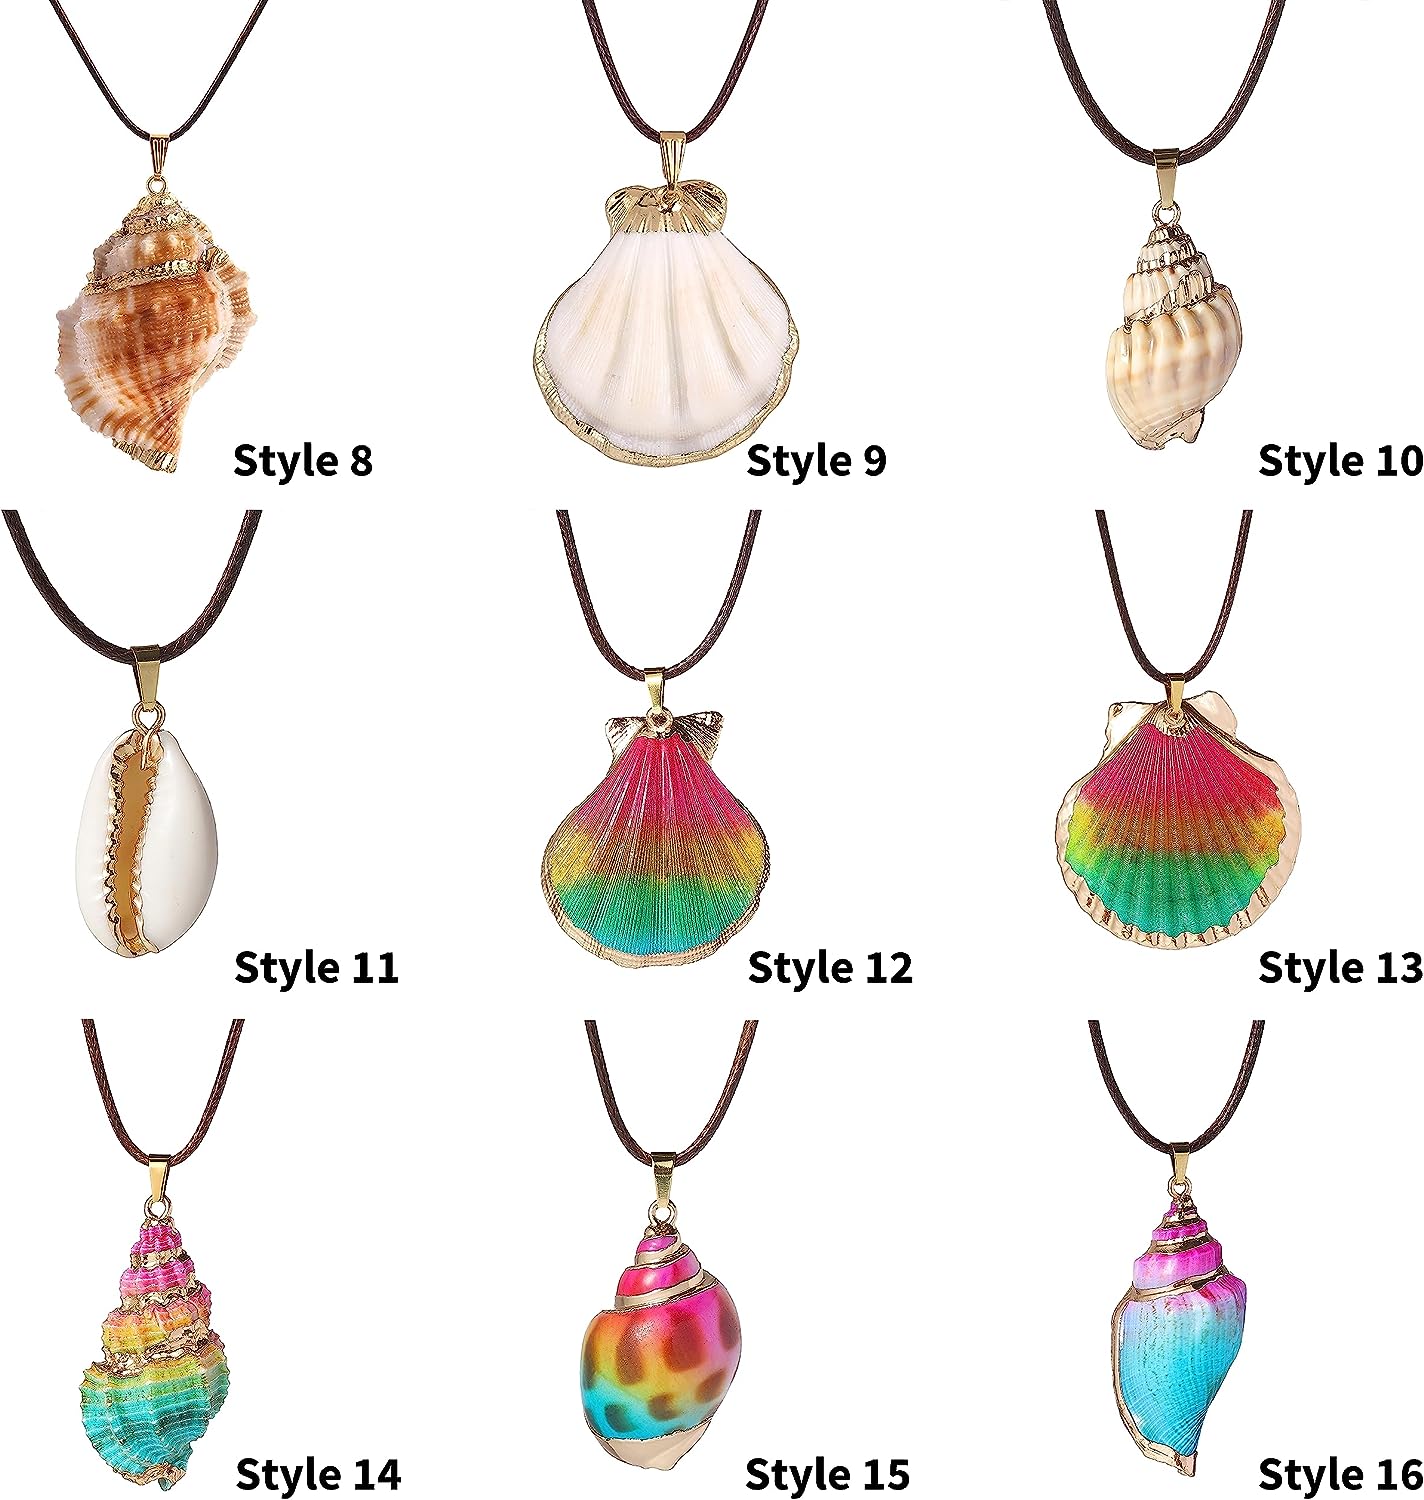 FM FM42 Natural Seashell Shell Scallop Conch Pendant Necklace with 27" Long Rope Chain (25 Styles)